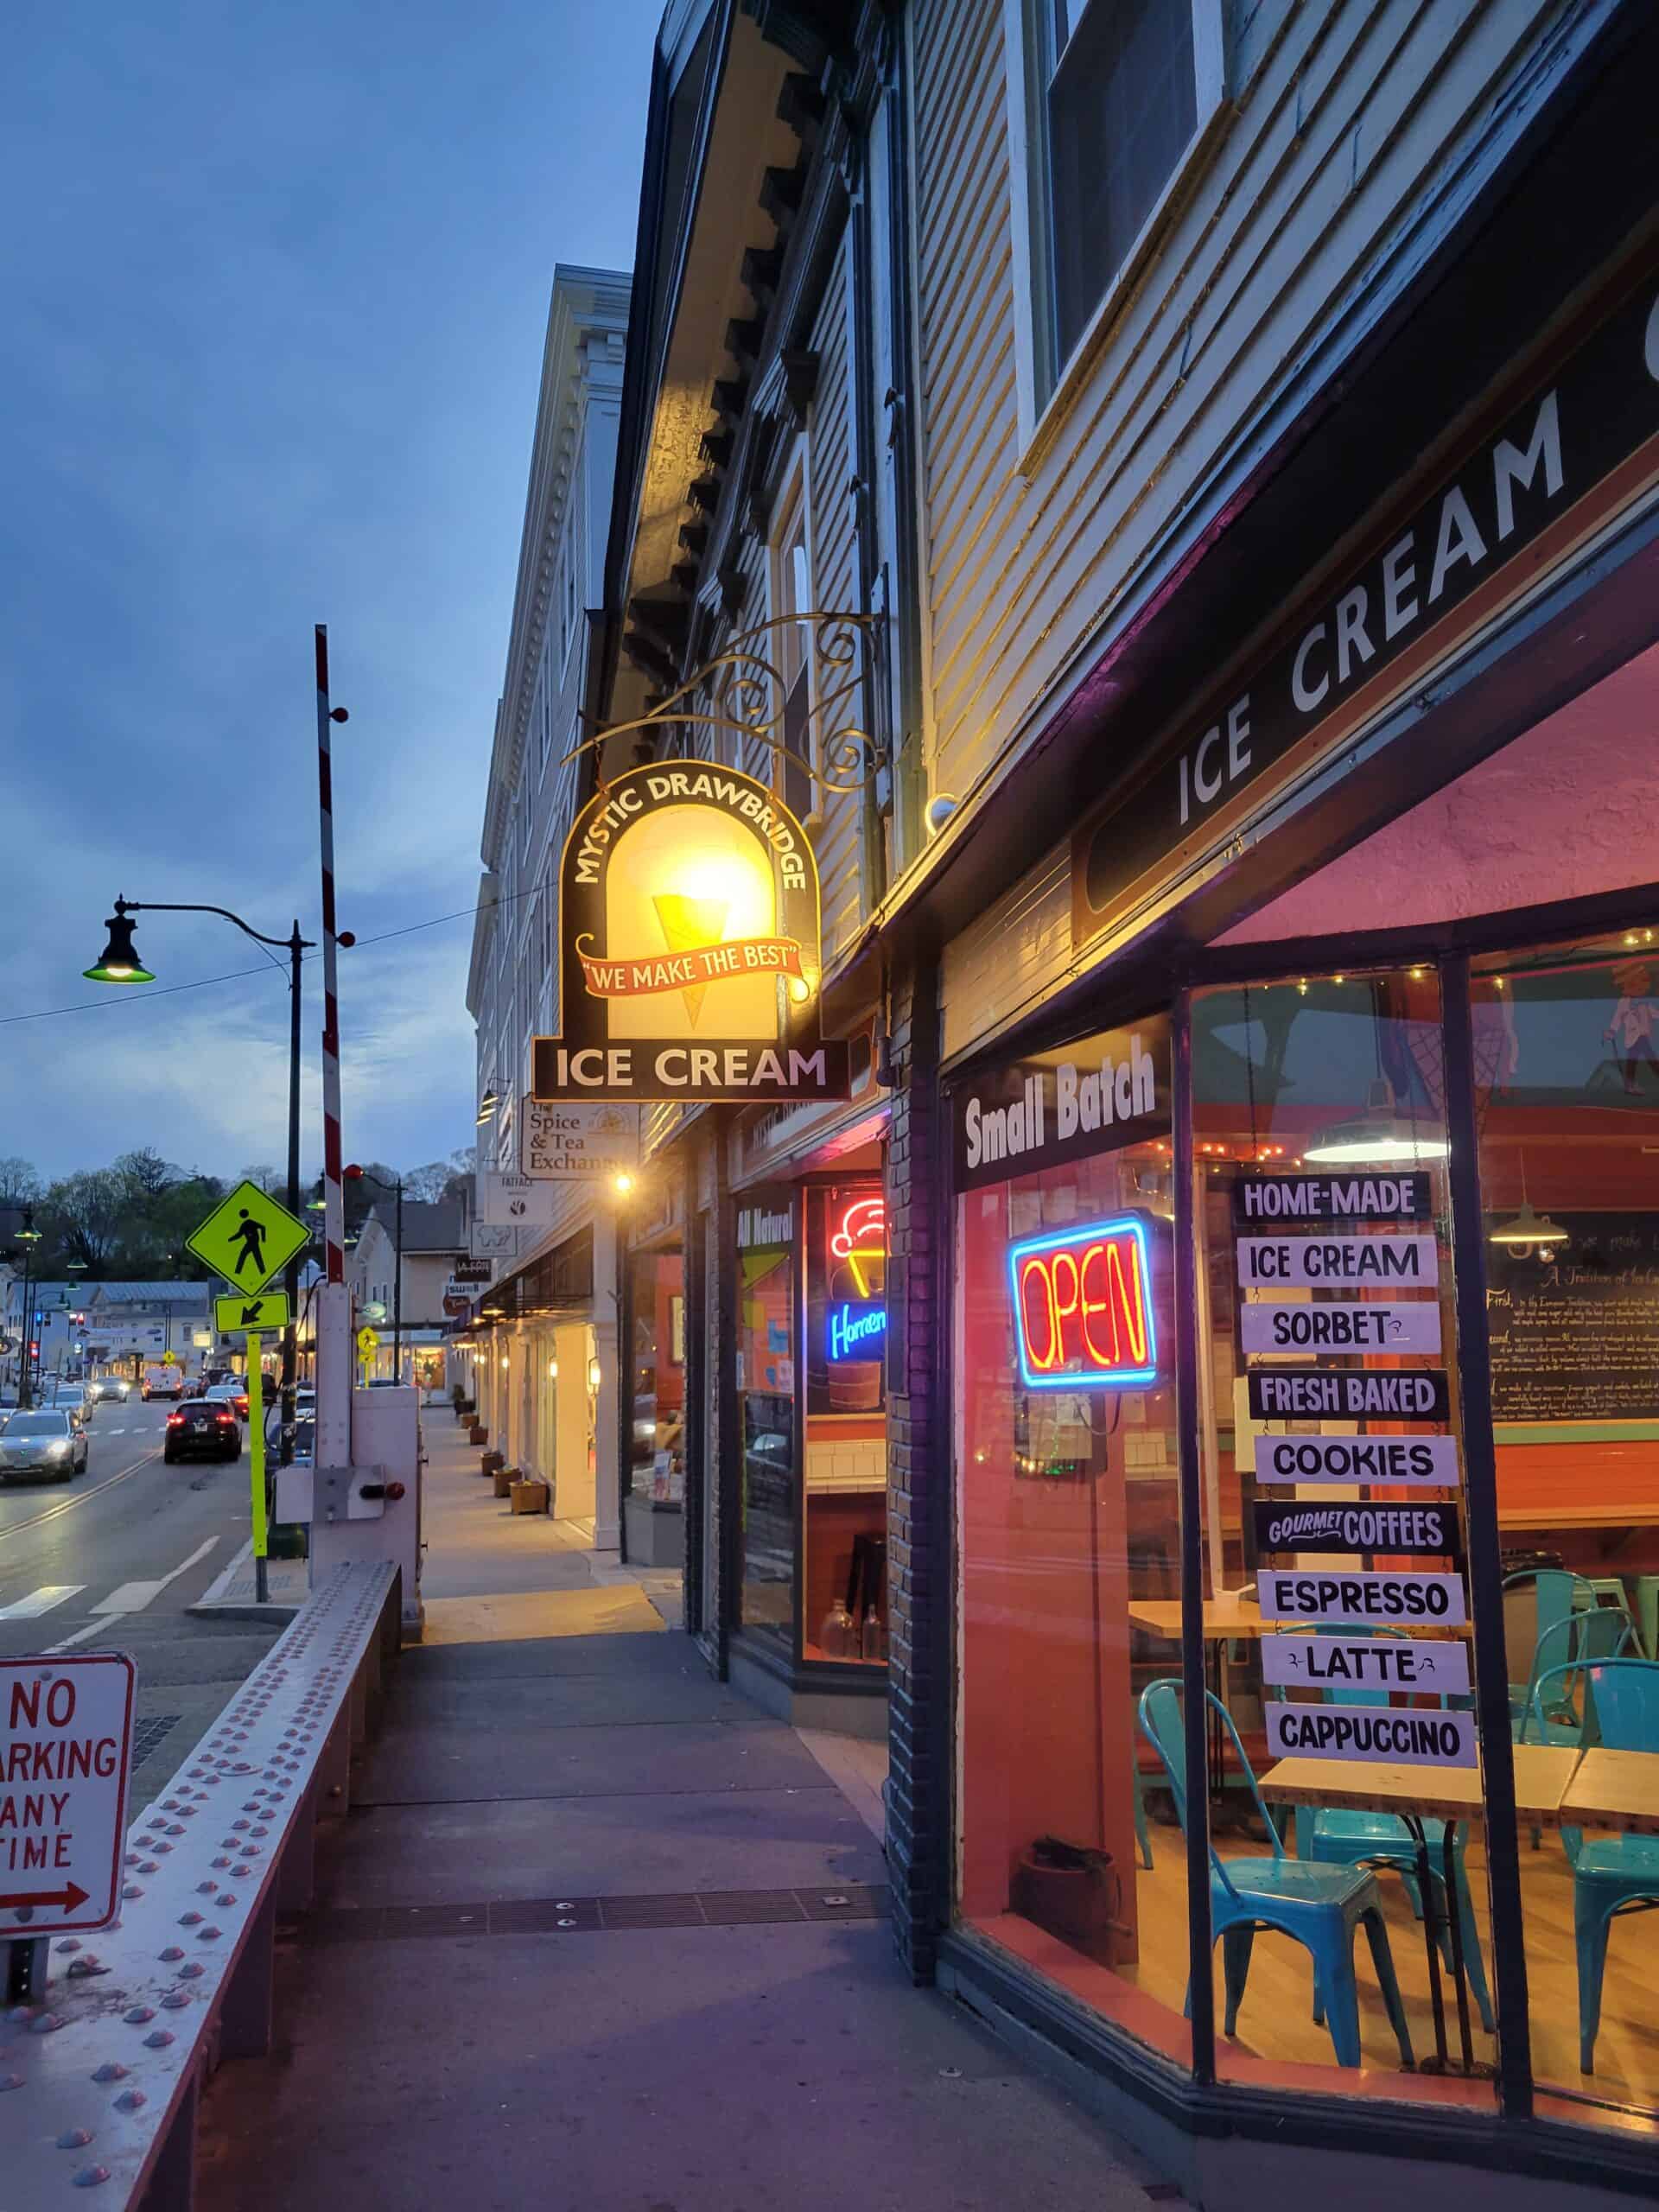 An ice cream shop sign in Mystic, Connecticut is on a narrow strip that includes several shops on one side and a busy roadway on the other